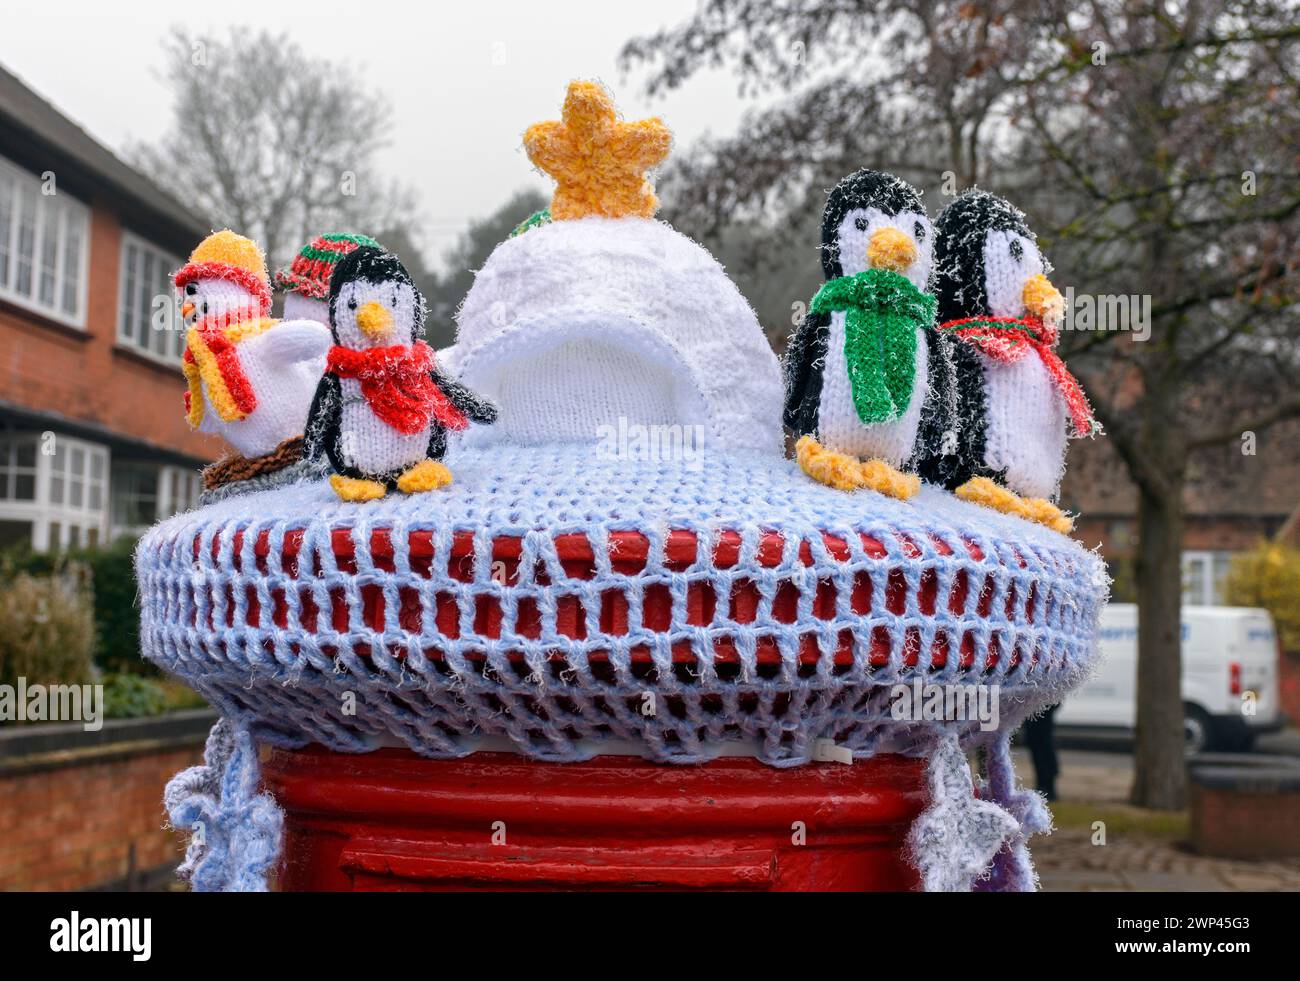 Knitted or crocheted post box topper depicting penguin characters, an igloo and a star.  At the Ruddington Christmas Market, Nottinghamshire, UK Stock Photo